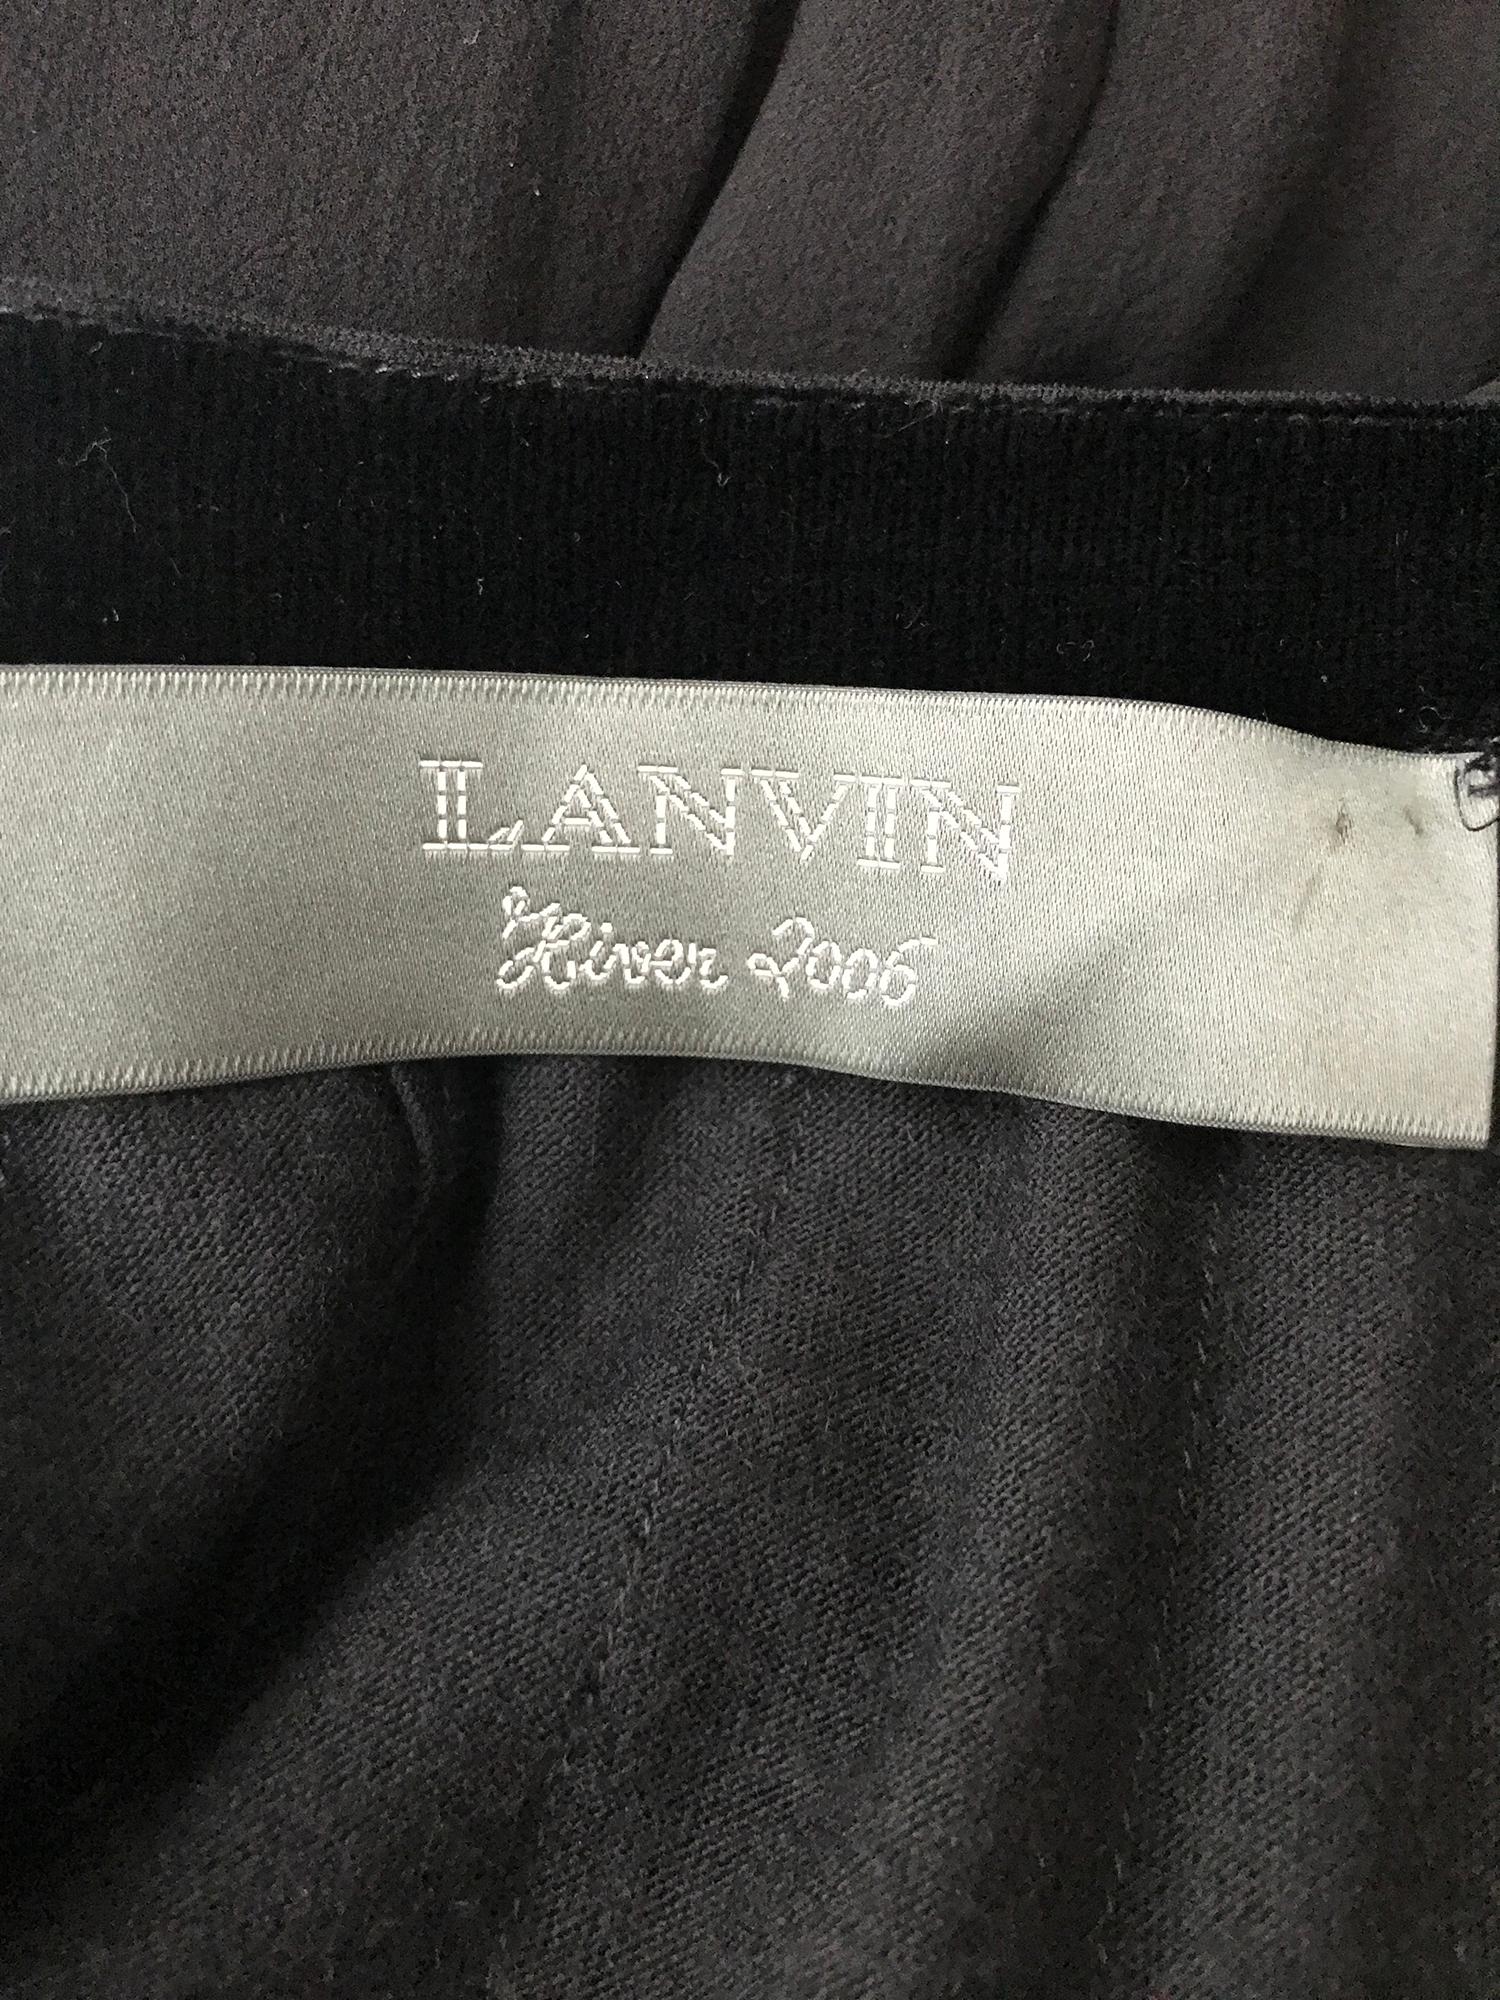 Lanvin Hiver 2006 Black Silk Skirt with Side Button Closure.  For Sale 5